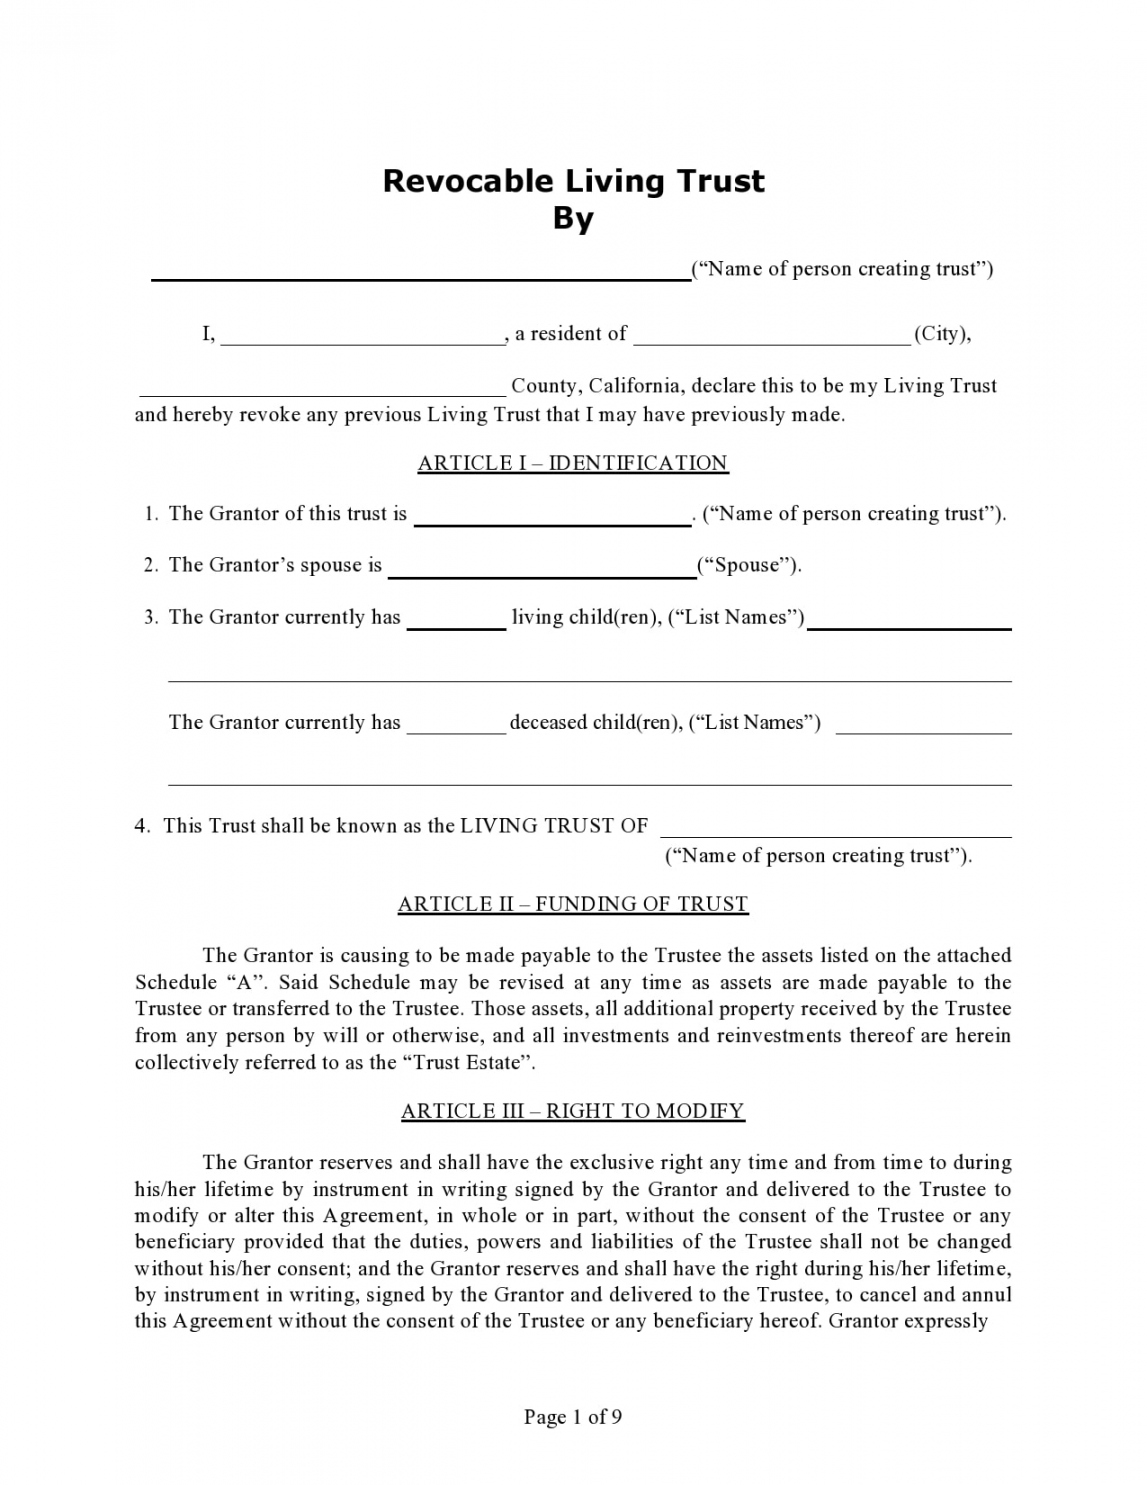 Free Living Trust Forms & Templates [Word] - TemplateArchive - FREE Printables - Free Printable Living Trust Forms